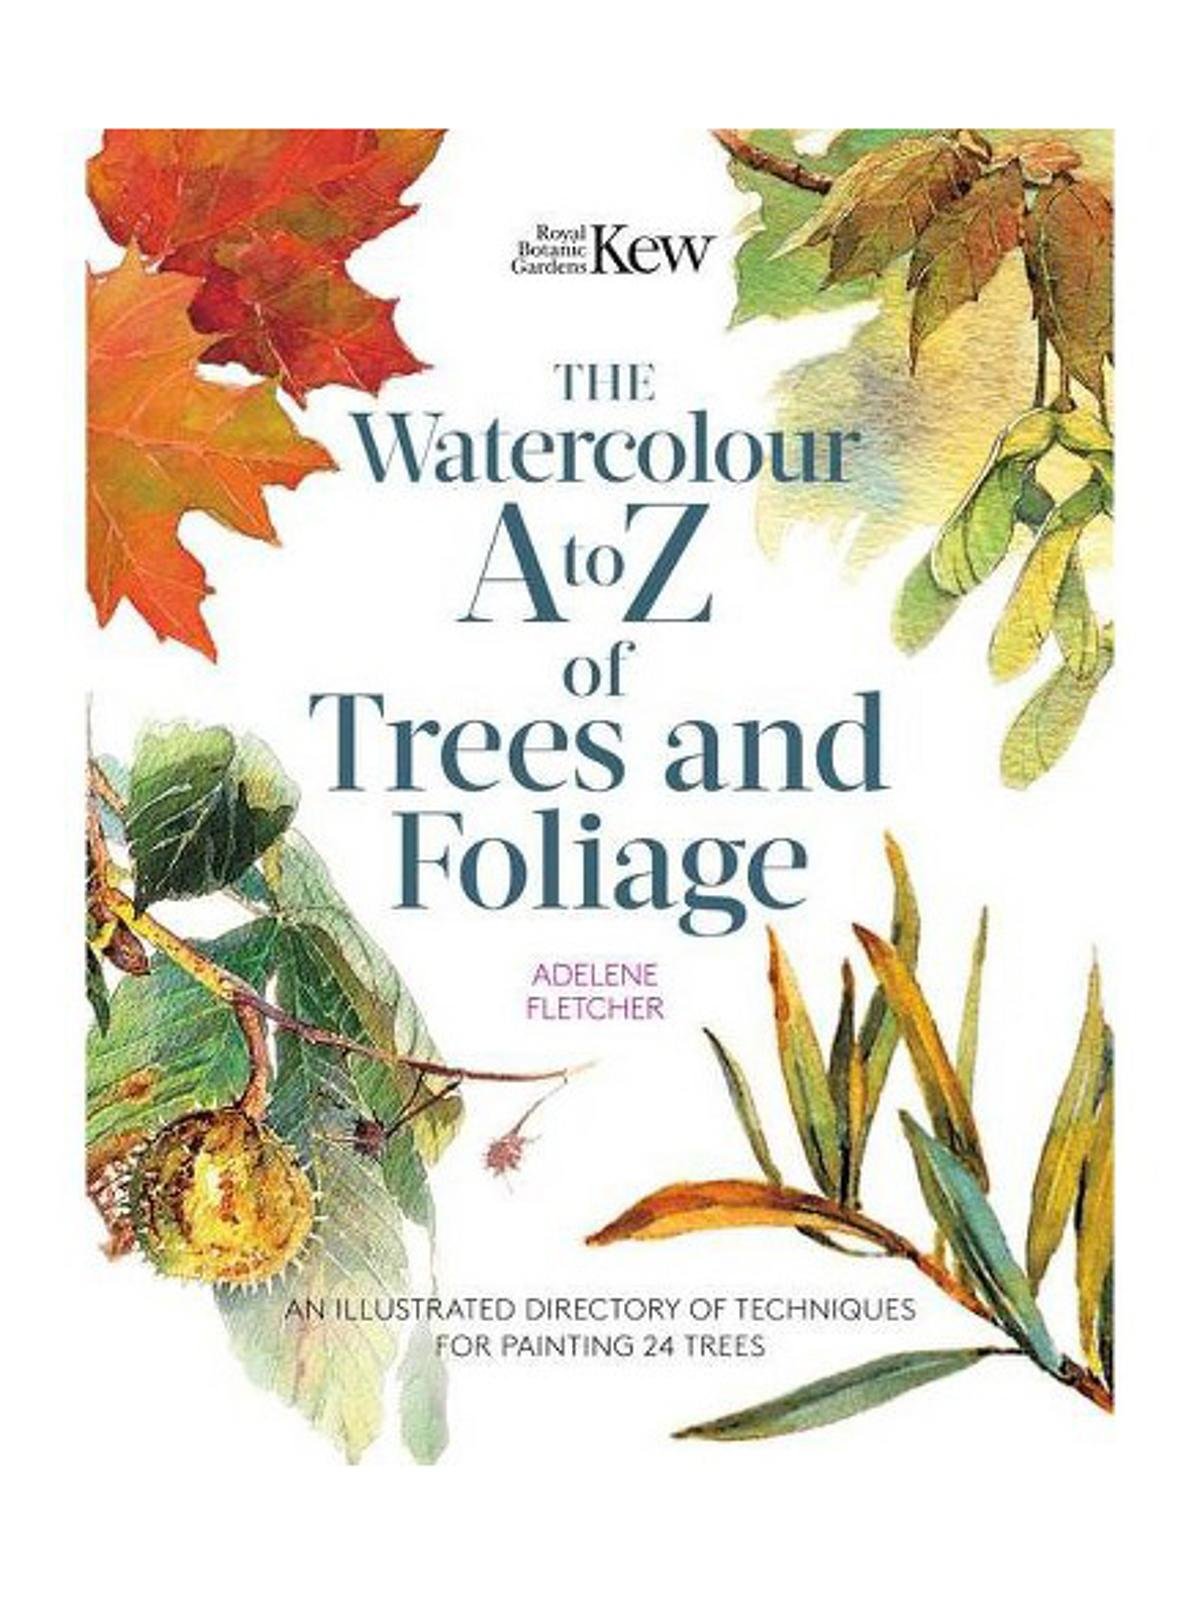 Search Press - The Watercolour A to Z of Trees & Foliage